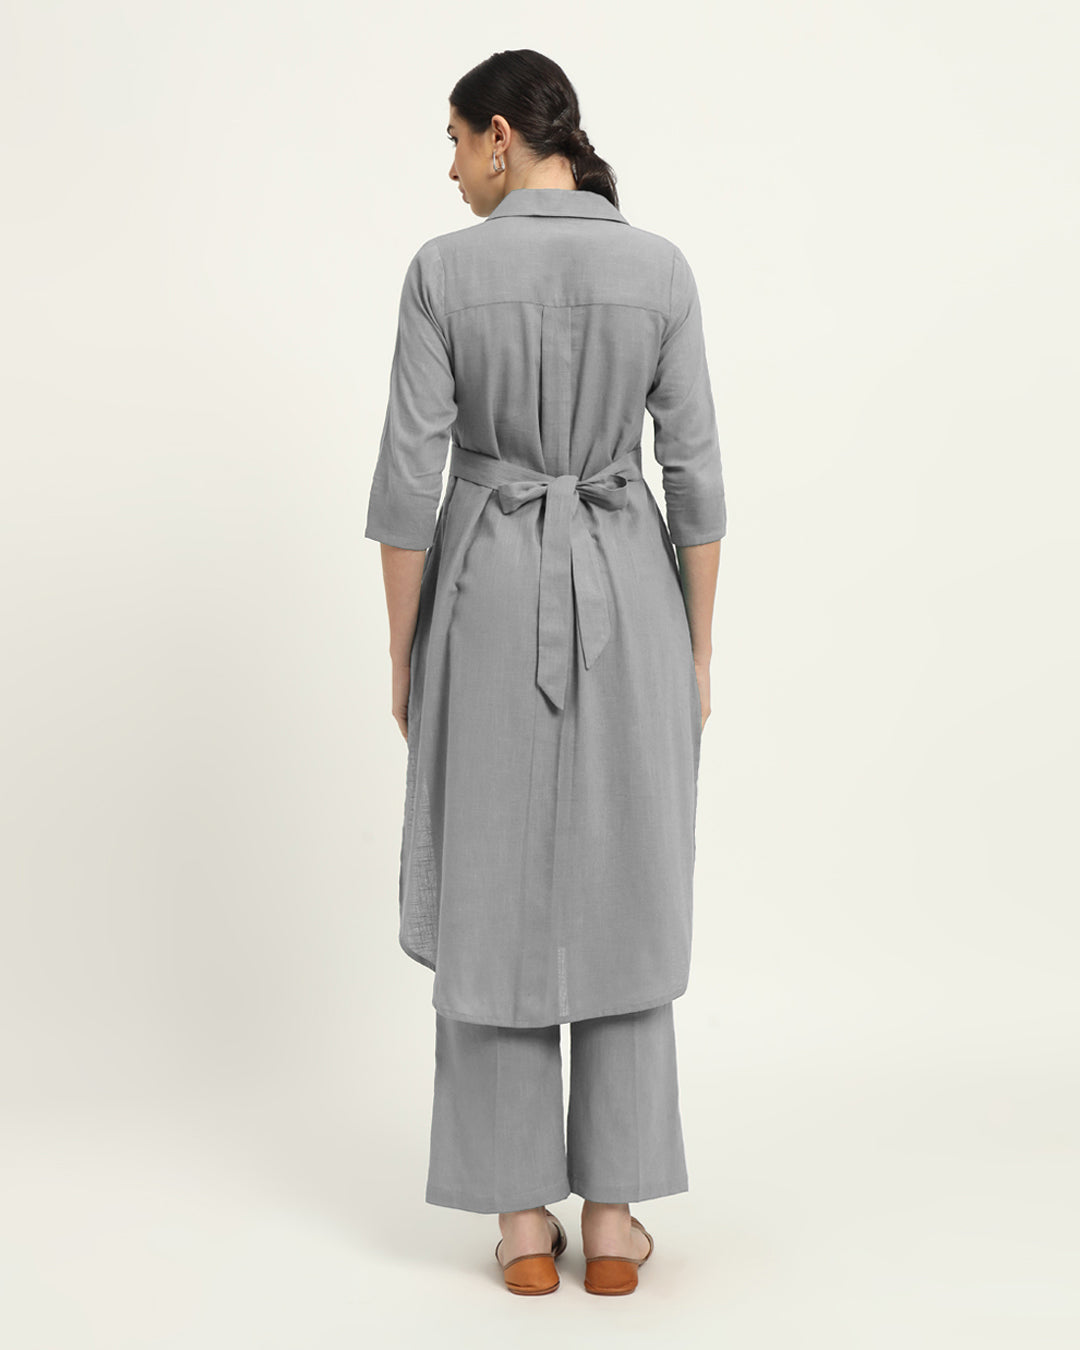 Iced Grey Bellisimo Belted Solid Kurta (Without Bottoms)